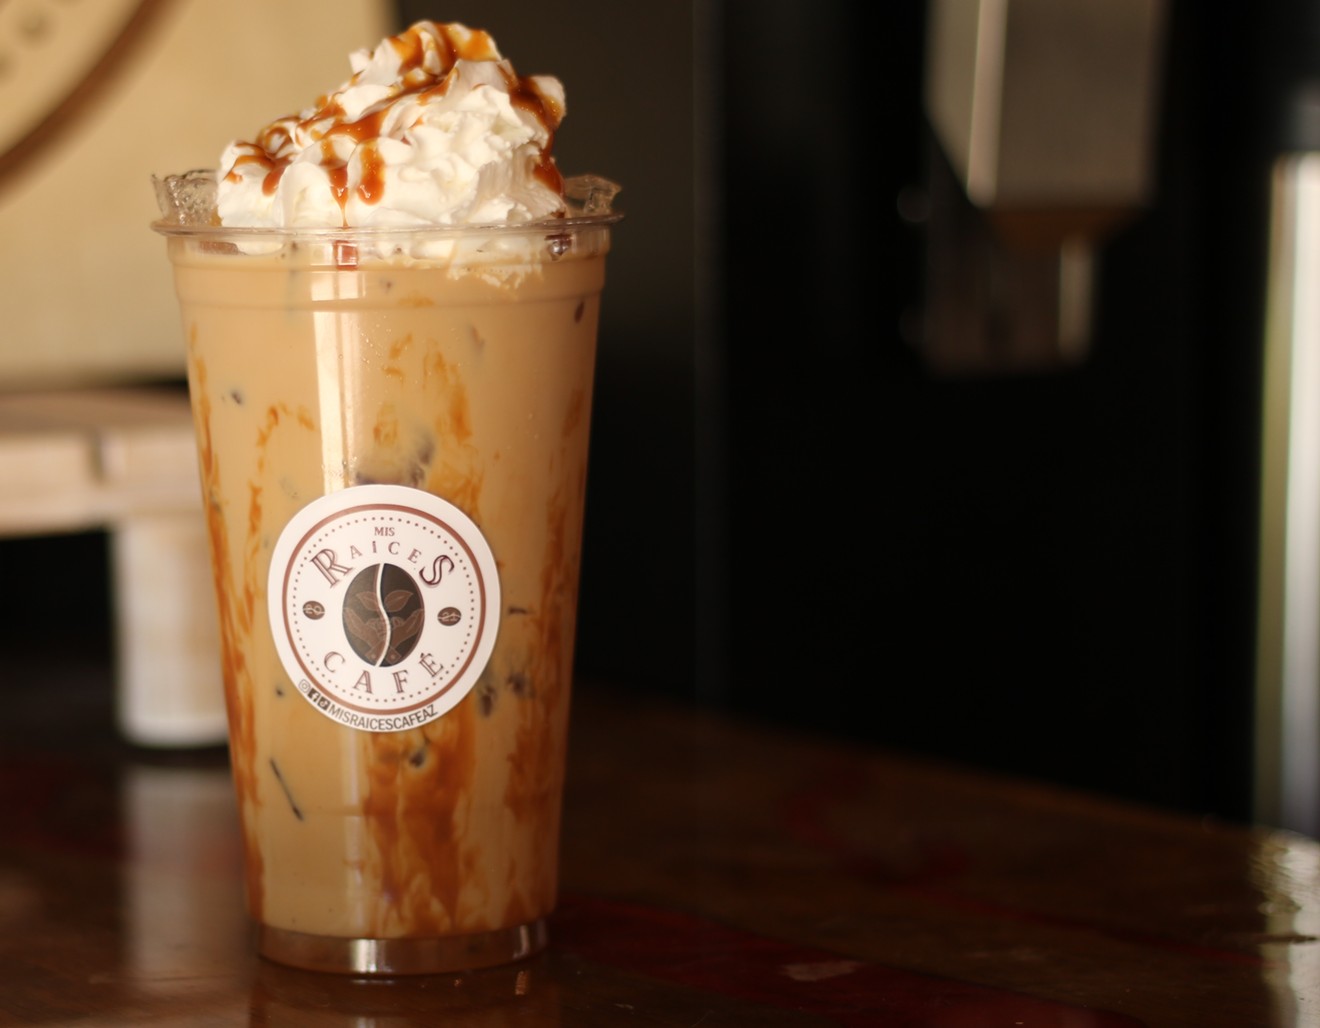 The new cafe serves coffee drinks inspired by Mexican desserts and candies.